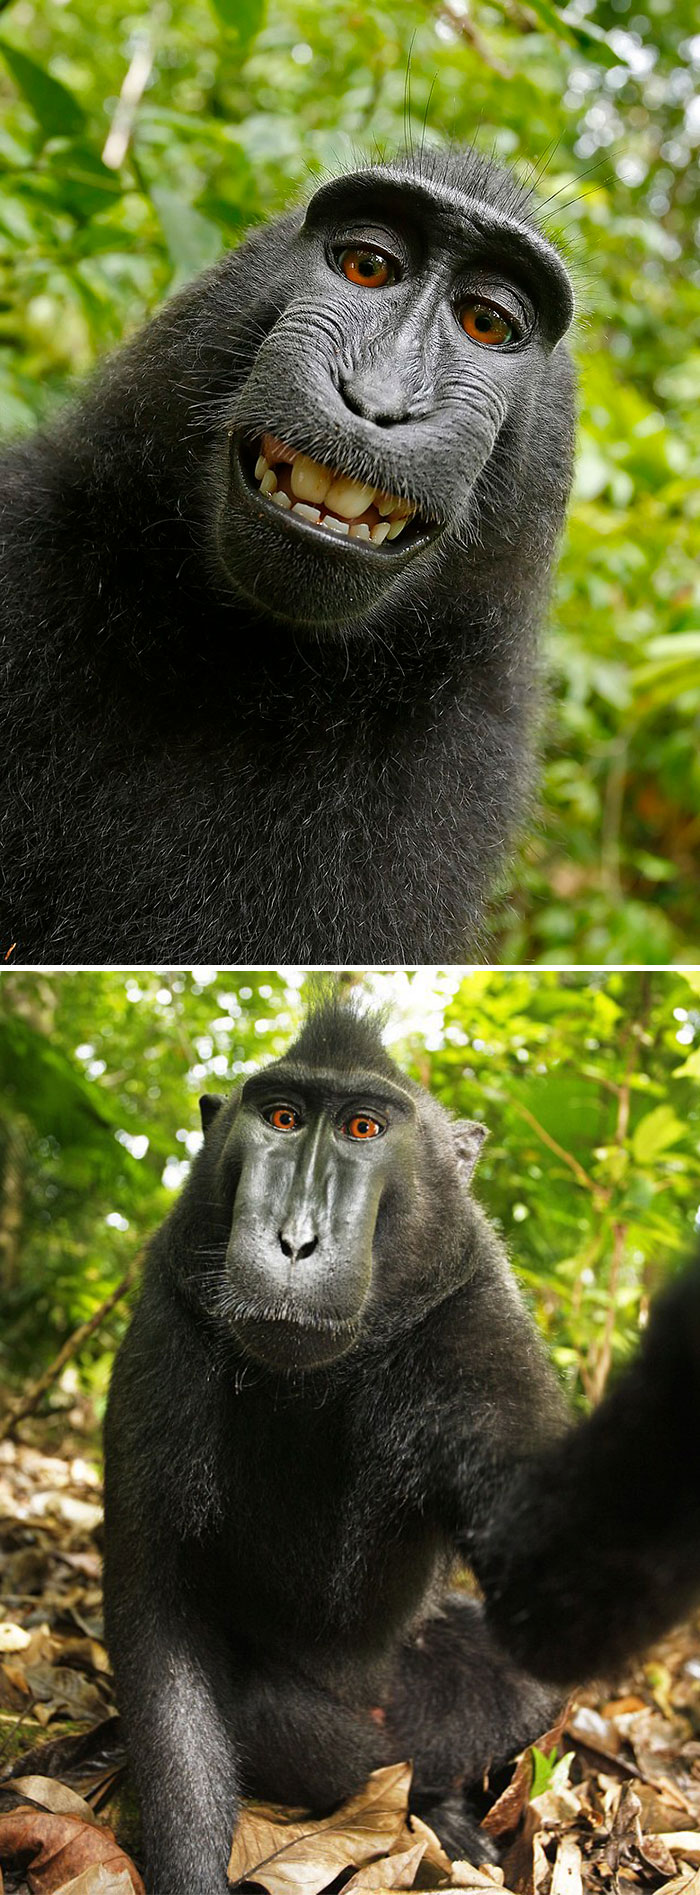 Self-Portrait Of A Female Celebes Crested Macaque, Who Had Picked Up Photographer David Slater's Camera And Photographed Herself With It